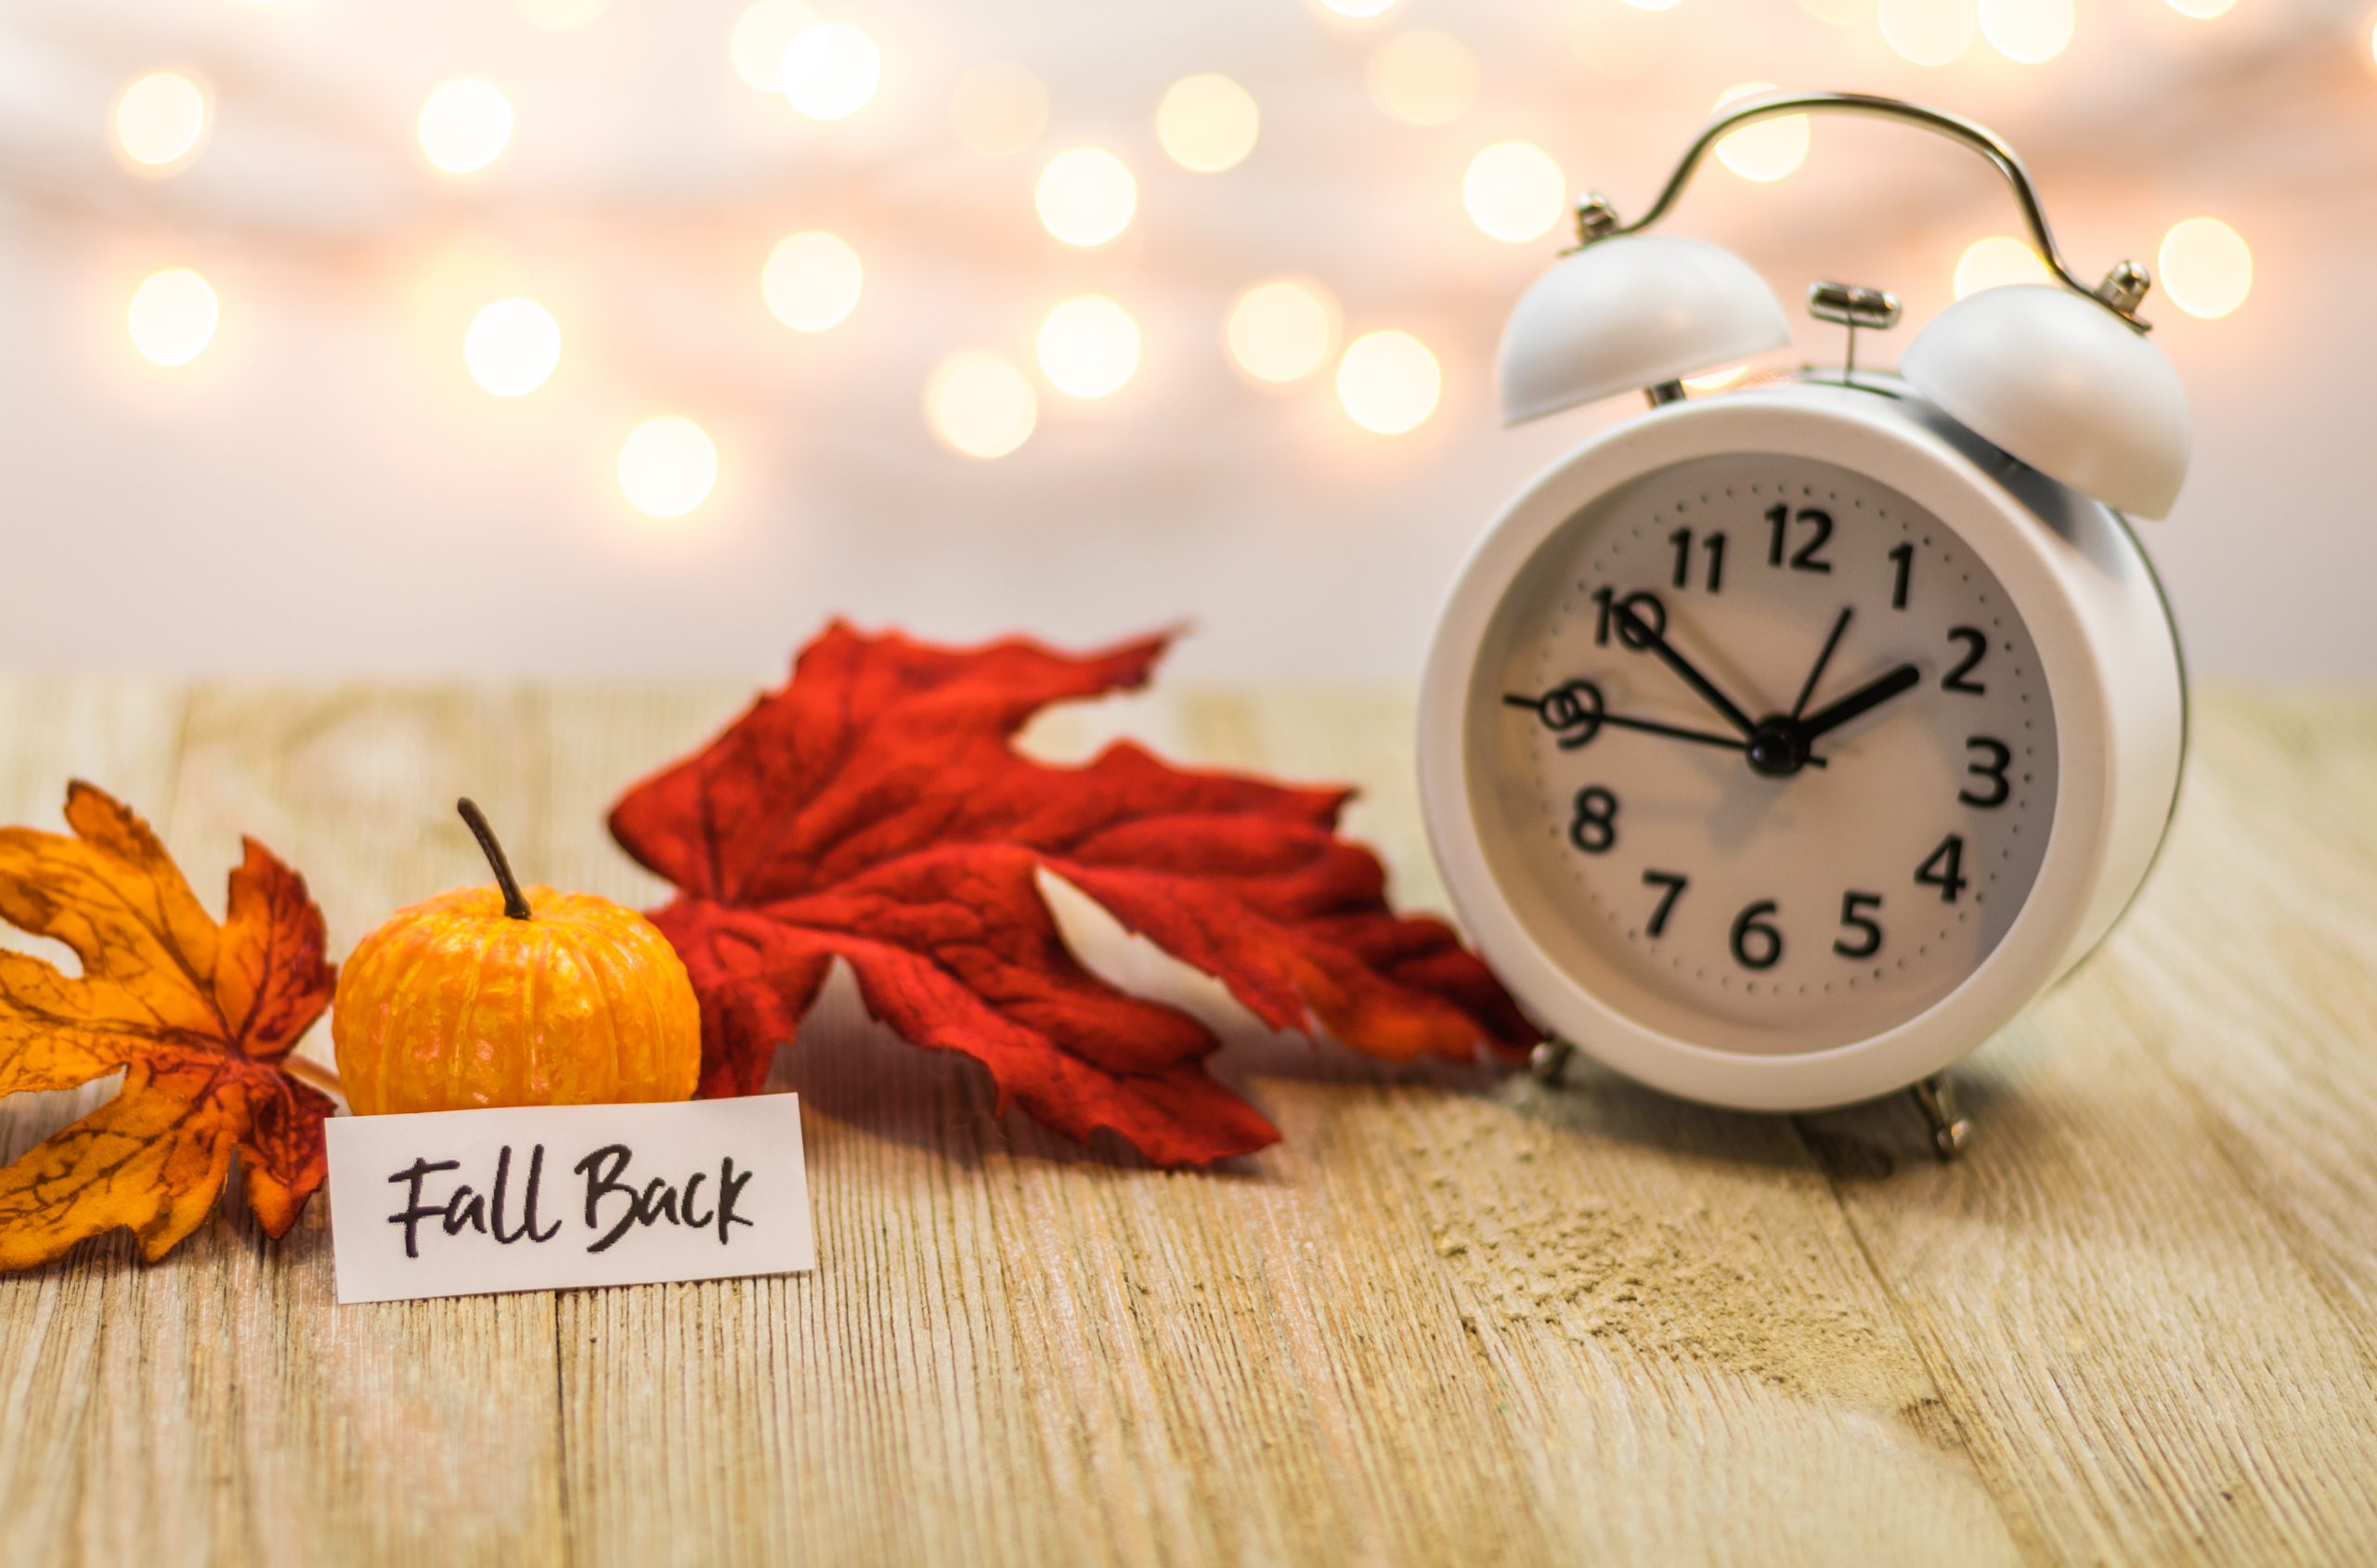 Fall back 2023 time change: When do clocks change for Daylight